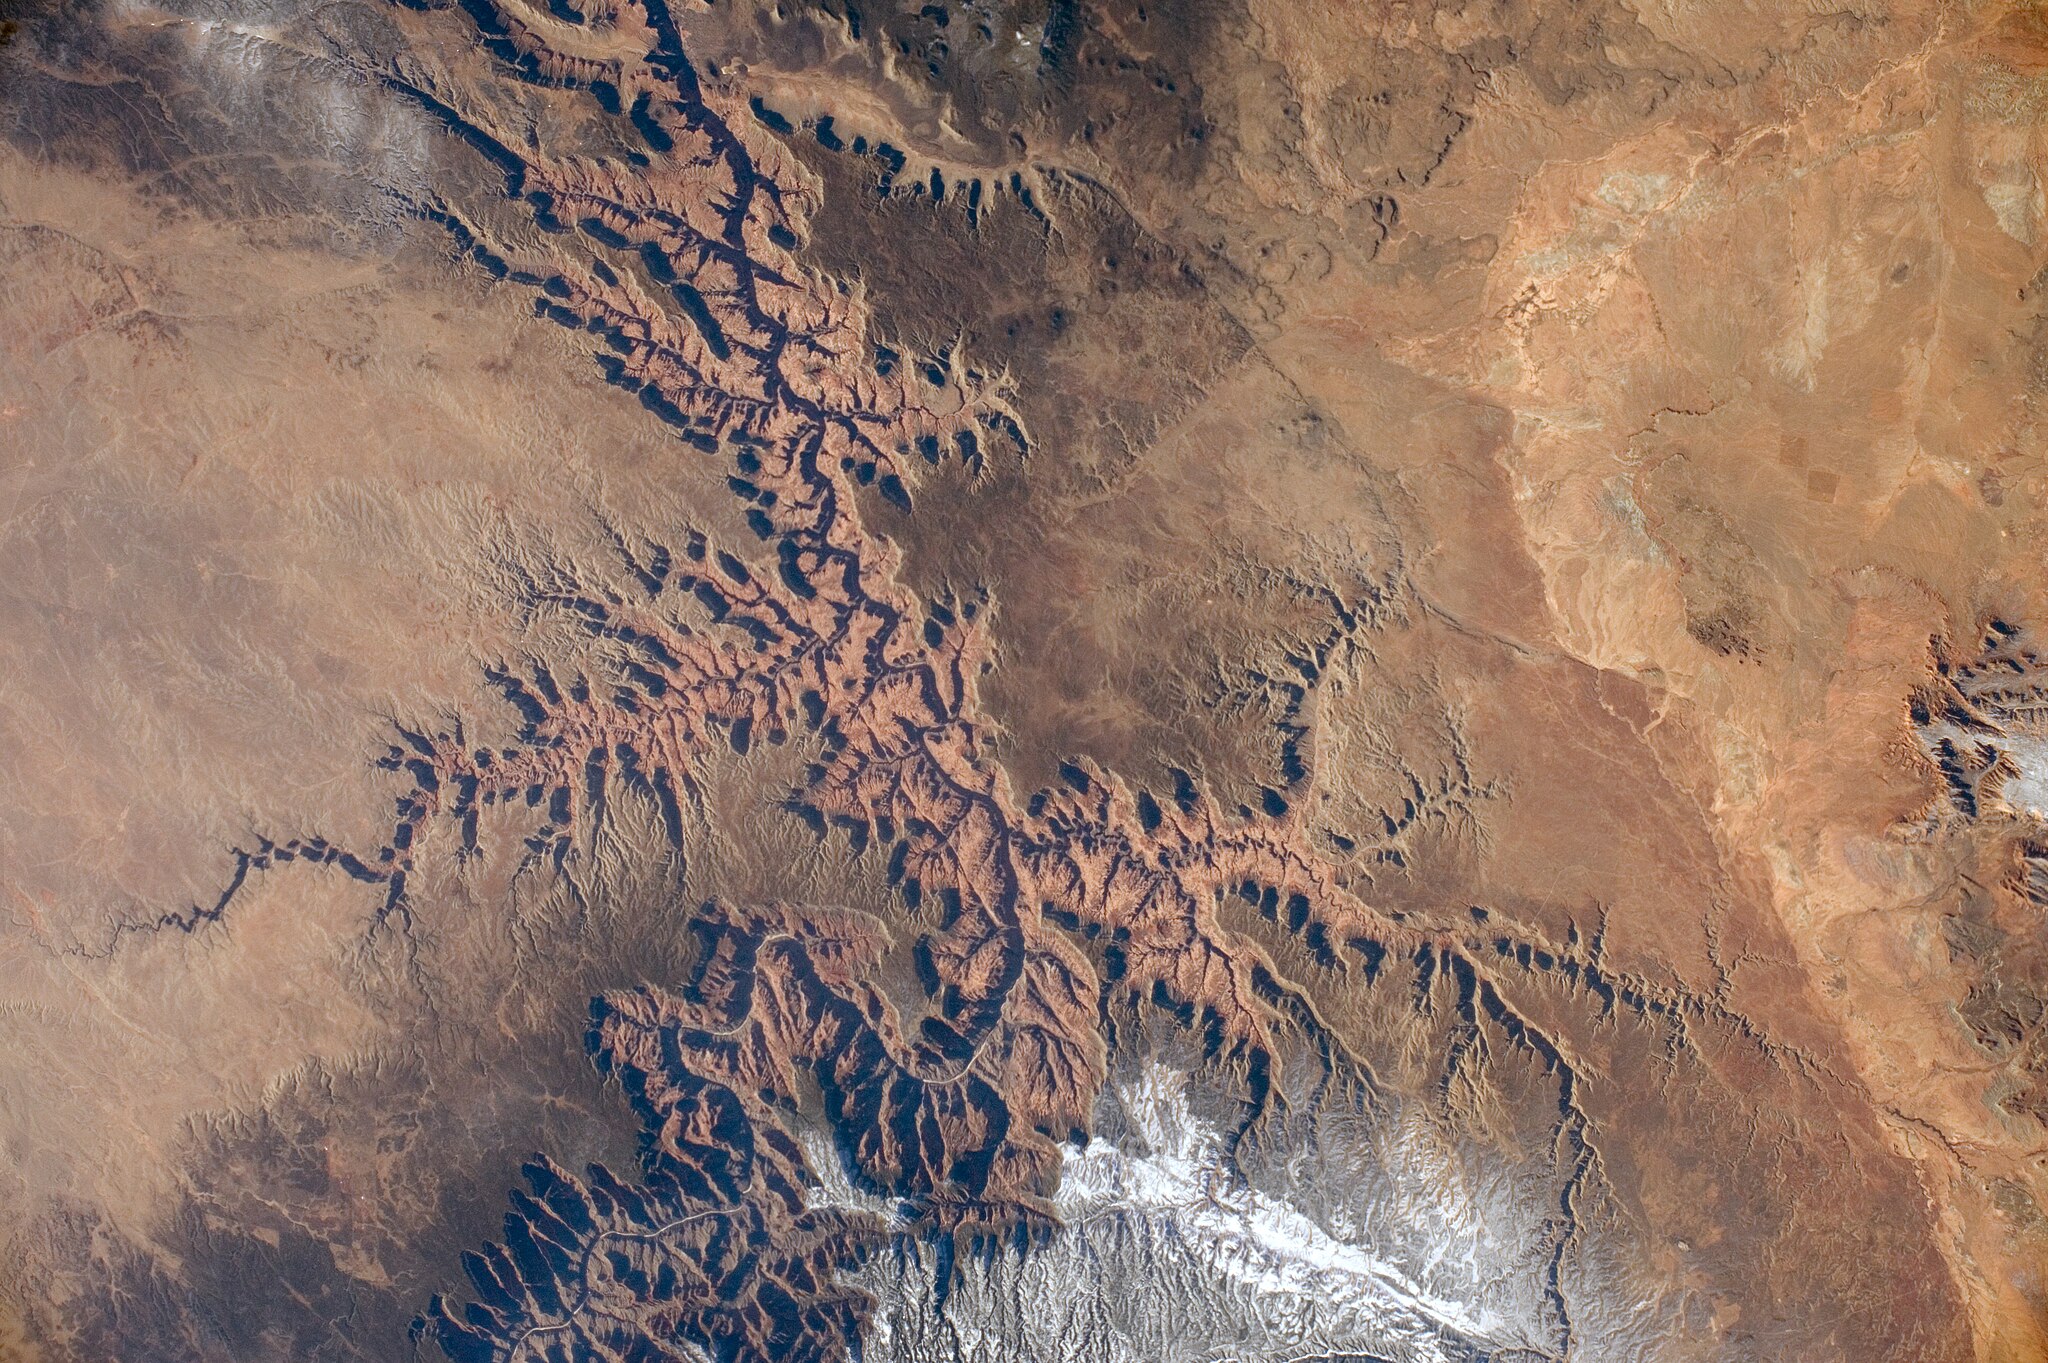 Crand Canyon from Space